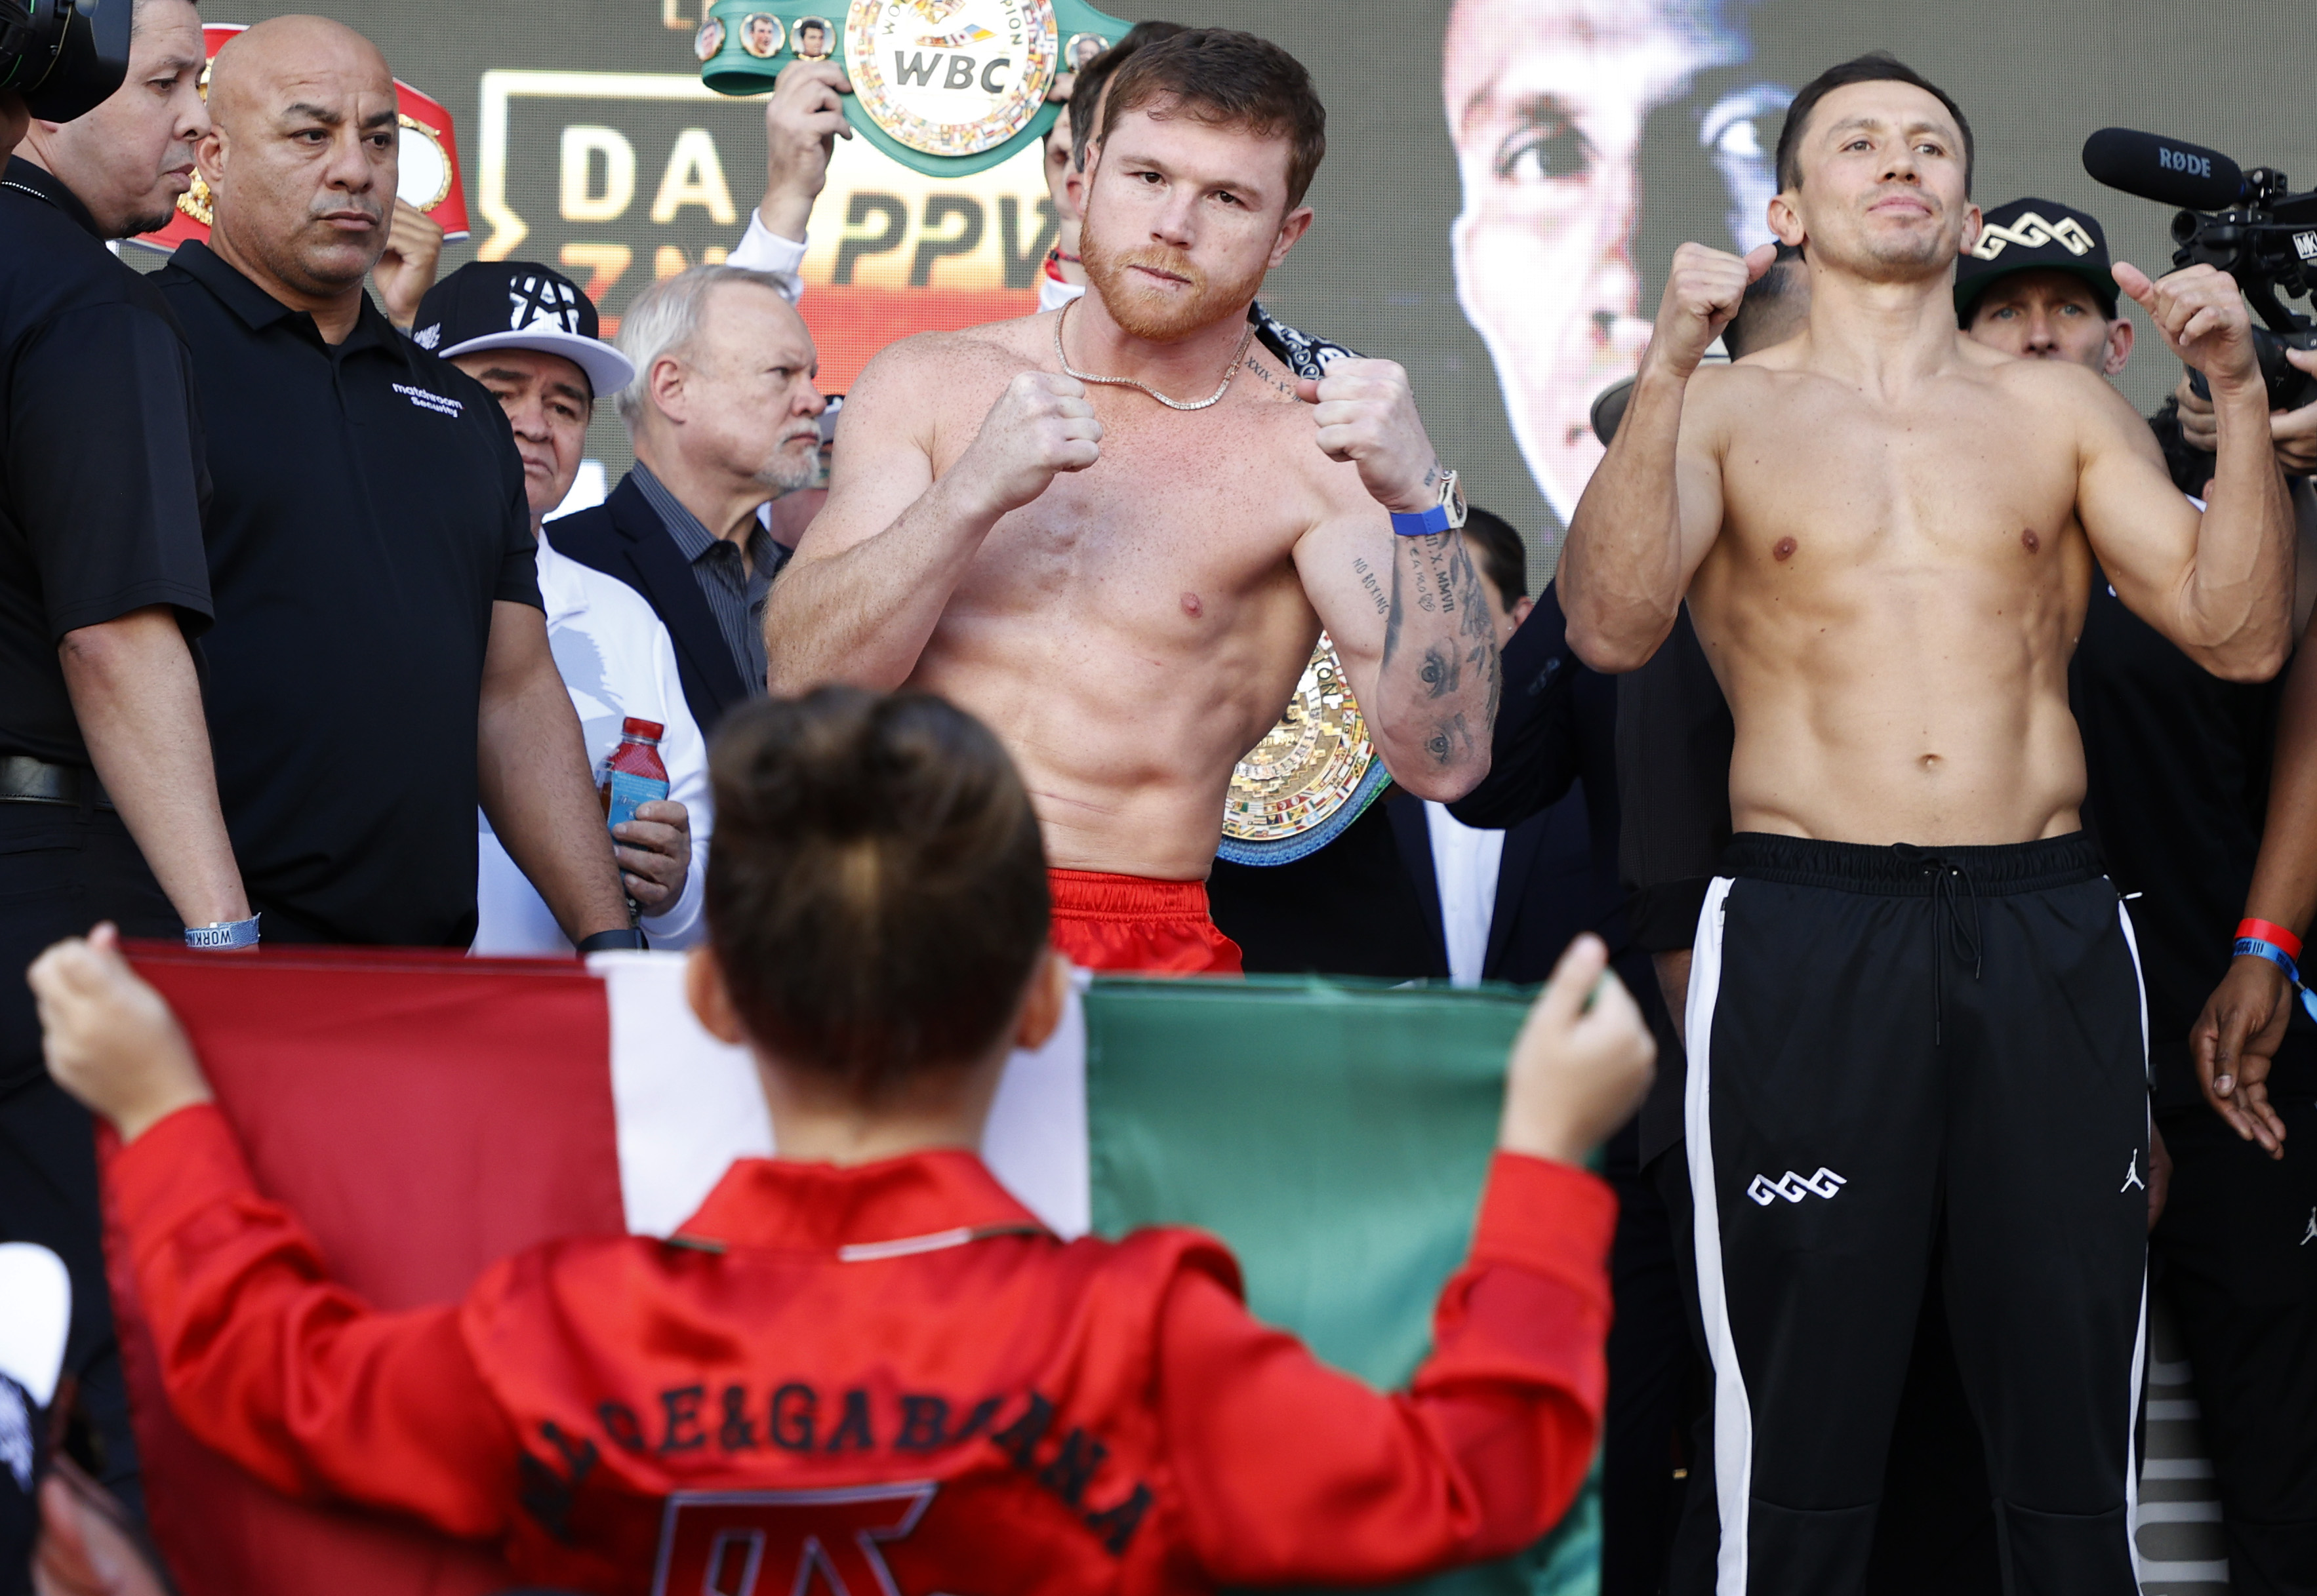 Canelo Alvarez of Mexico (L) and Gennadiy Golovkin of Kazakhstan (R) pose as Alvarez's daughter, Maria Fernanda Alvarez, holds the Mexican national flag during a ceremonial weigh-in at Toshiba Plaza on September 16, 2022 in Las Vegas, Nevada. Alvarez and Golovkin will meet for the undisputed super middleweight title bout at T-Mobile Arena in Las Vegas on September 17. (Photo by Sarah Stier—Getty Images)